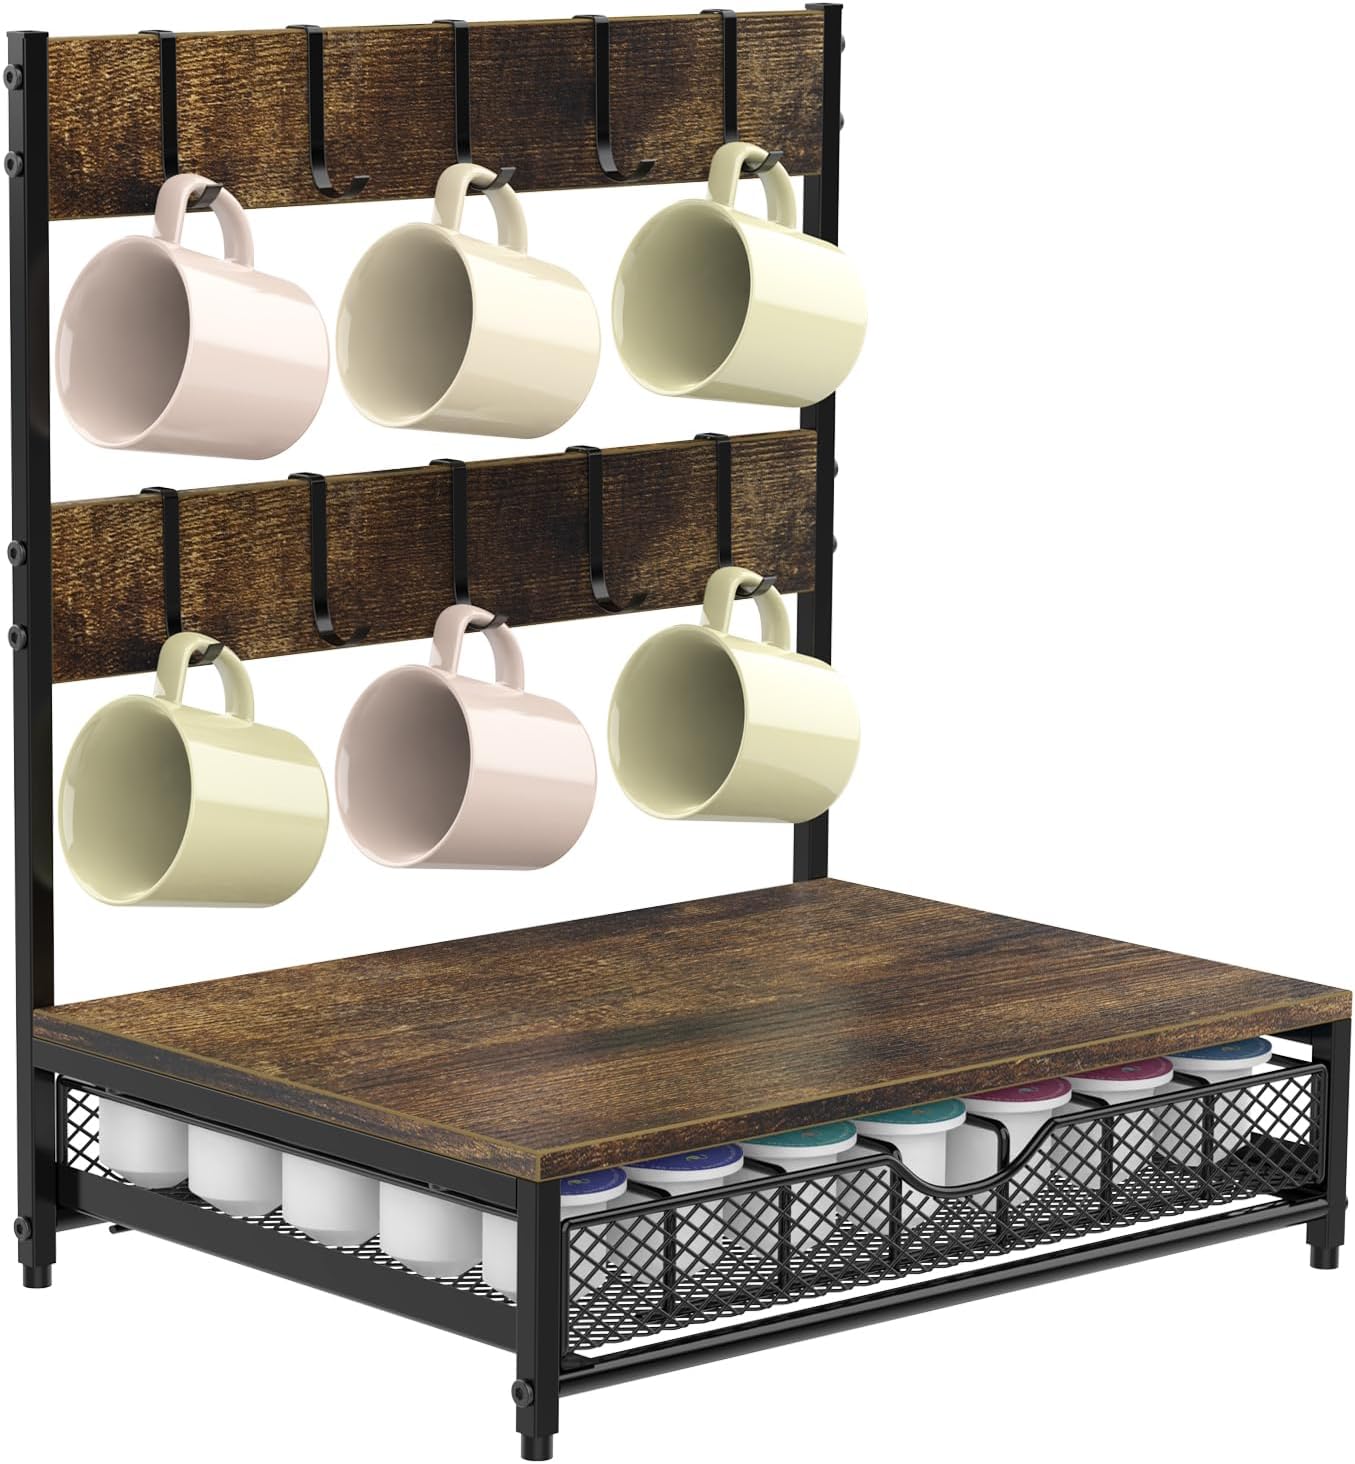 Coffee Pod Drawer Holder with Mug Hooks Coffee Pod Storage Organizer 35 Capacity Coffee Capsules Stand with Mug Holder for Counter Home Office, Rustic Brown